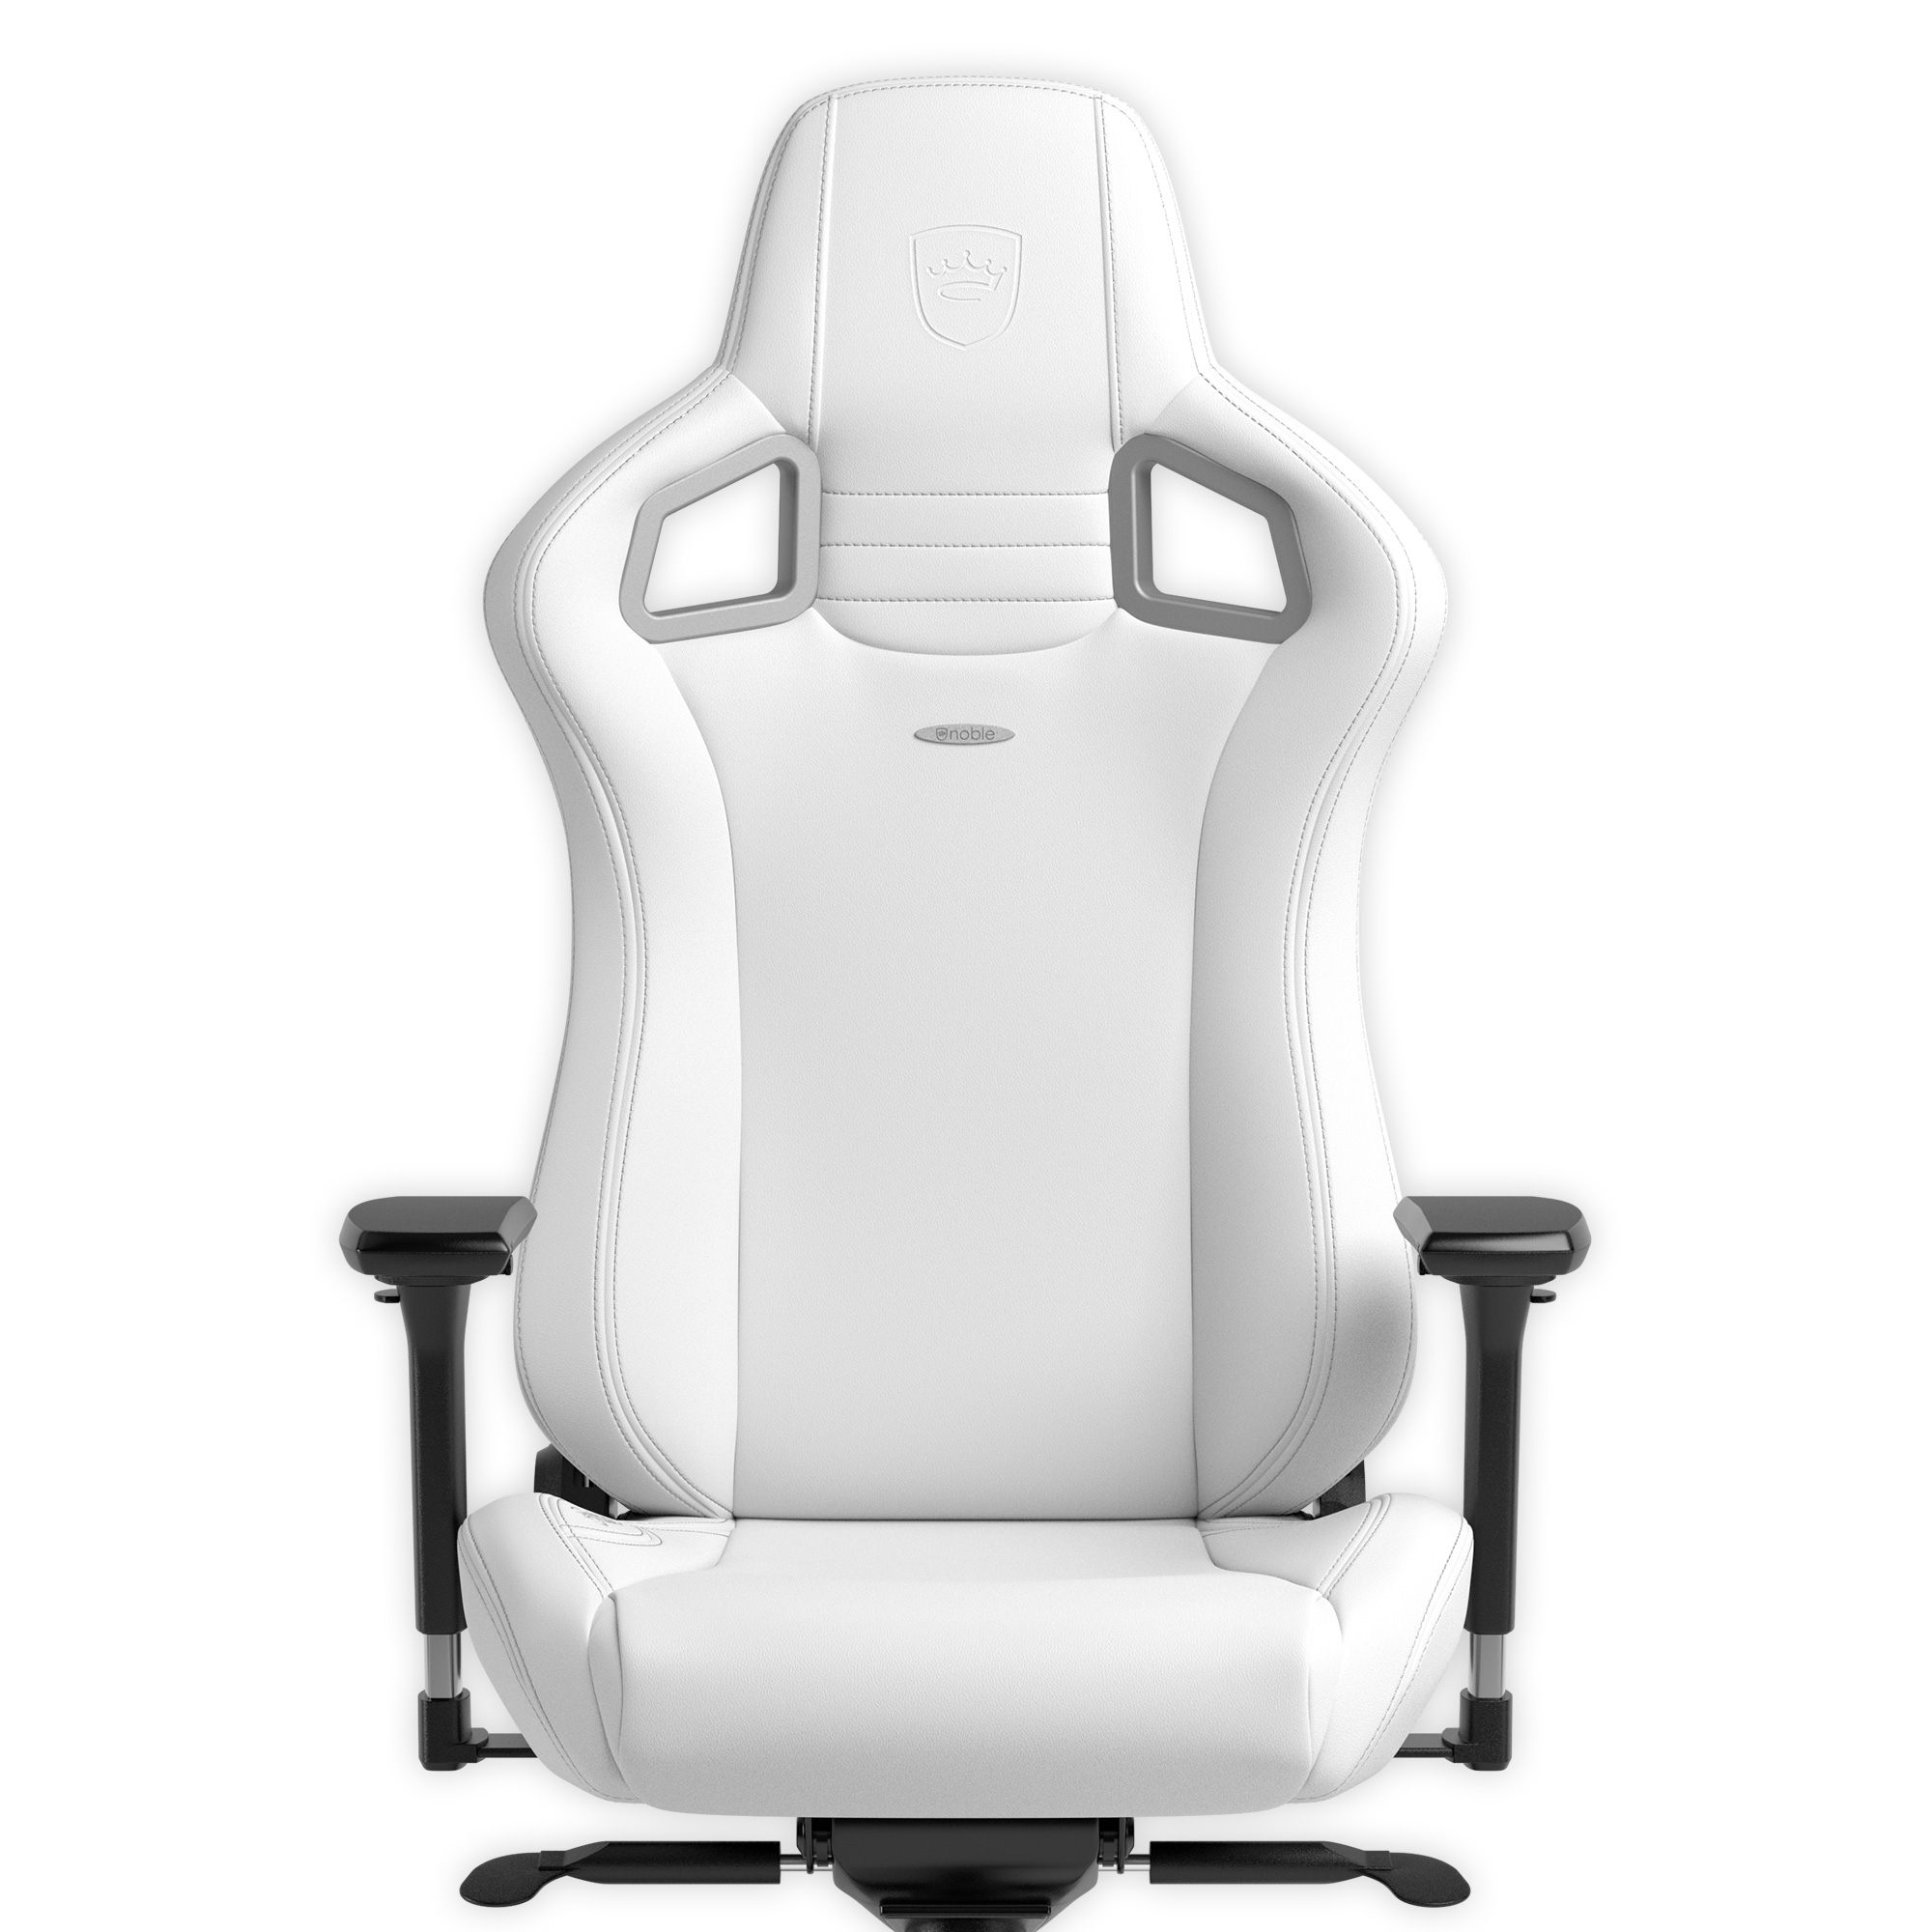 noblechairs - noblechairs EPIC Gaming Chair - White Edition